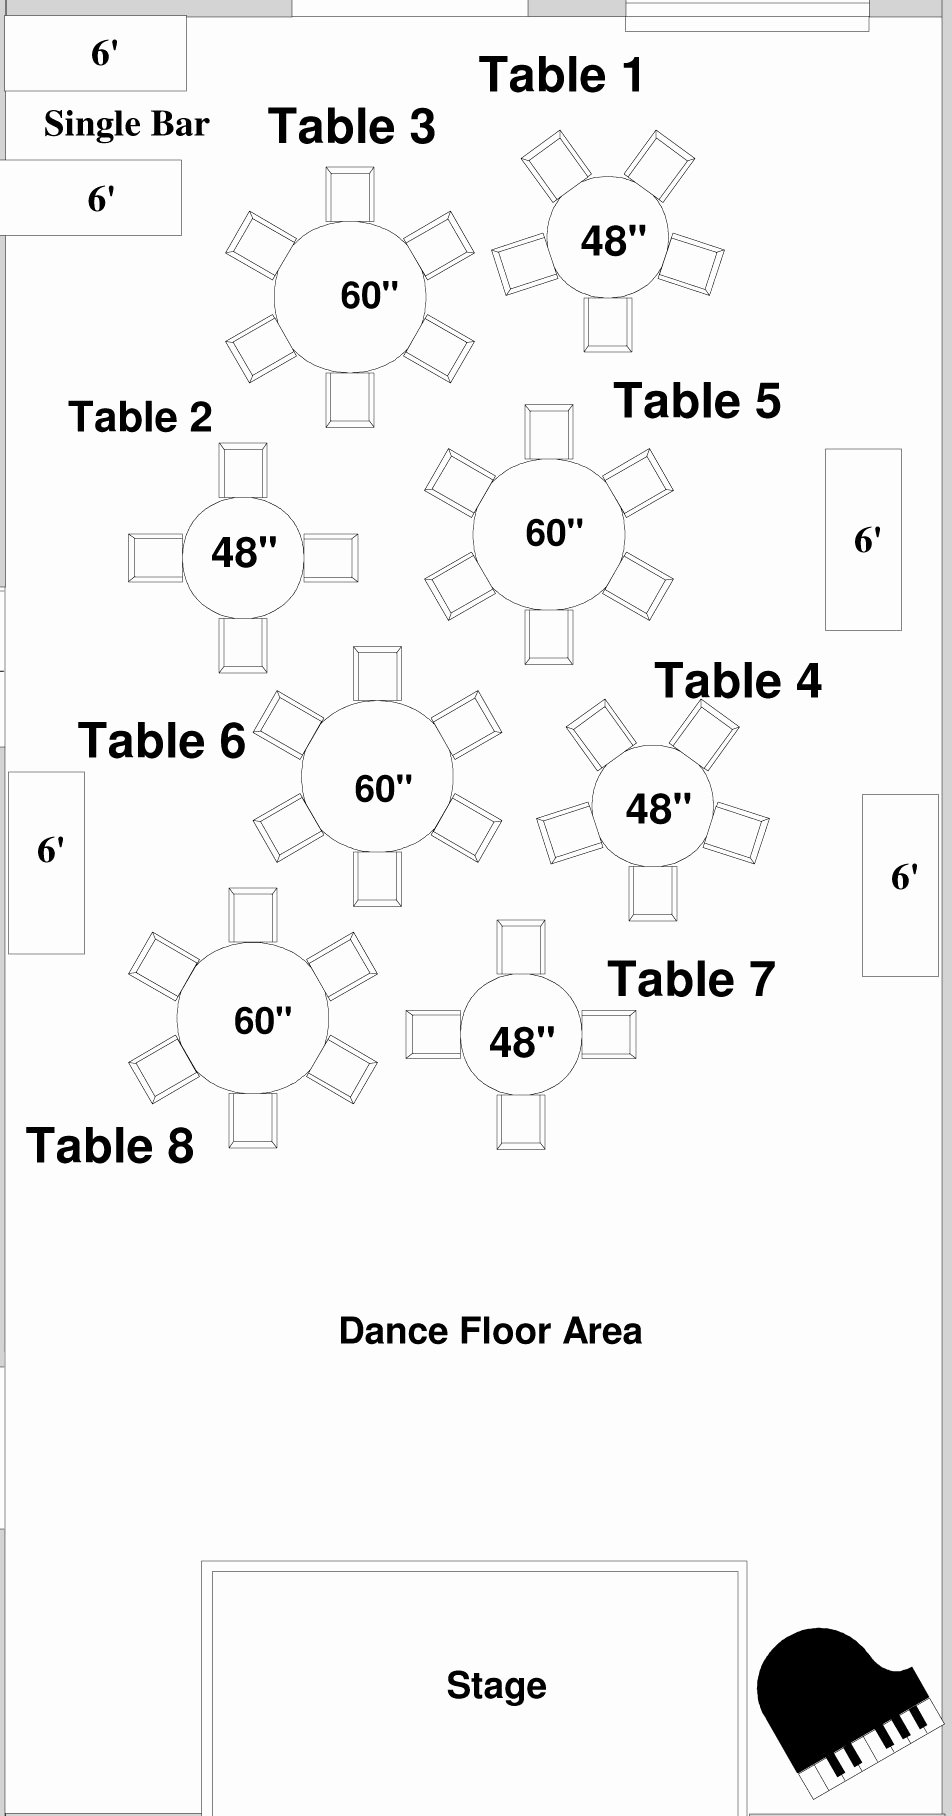 Free Wedding Floor Plan Template Awesome Choosing A Floor Plan for Your Wedding Reception